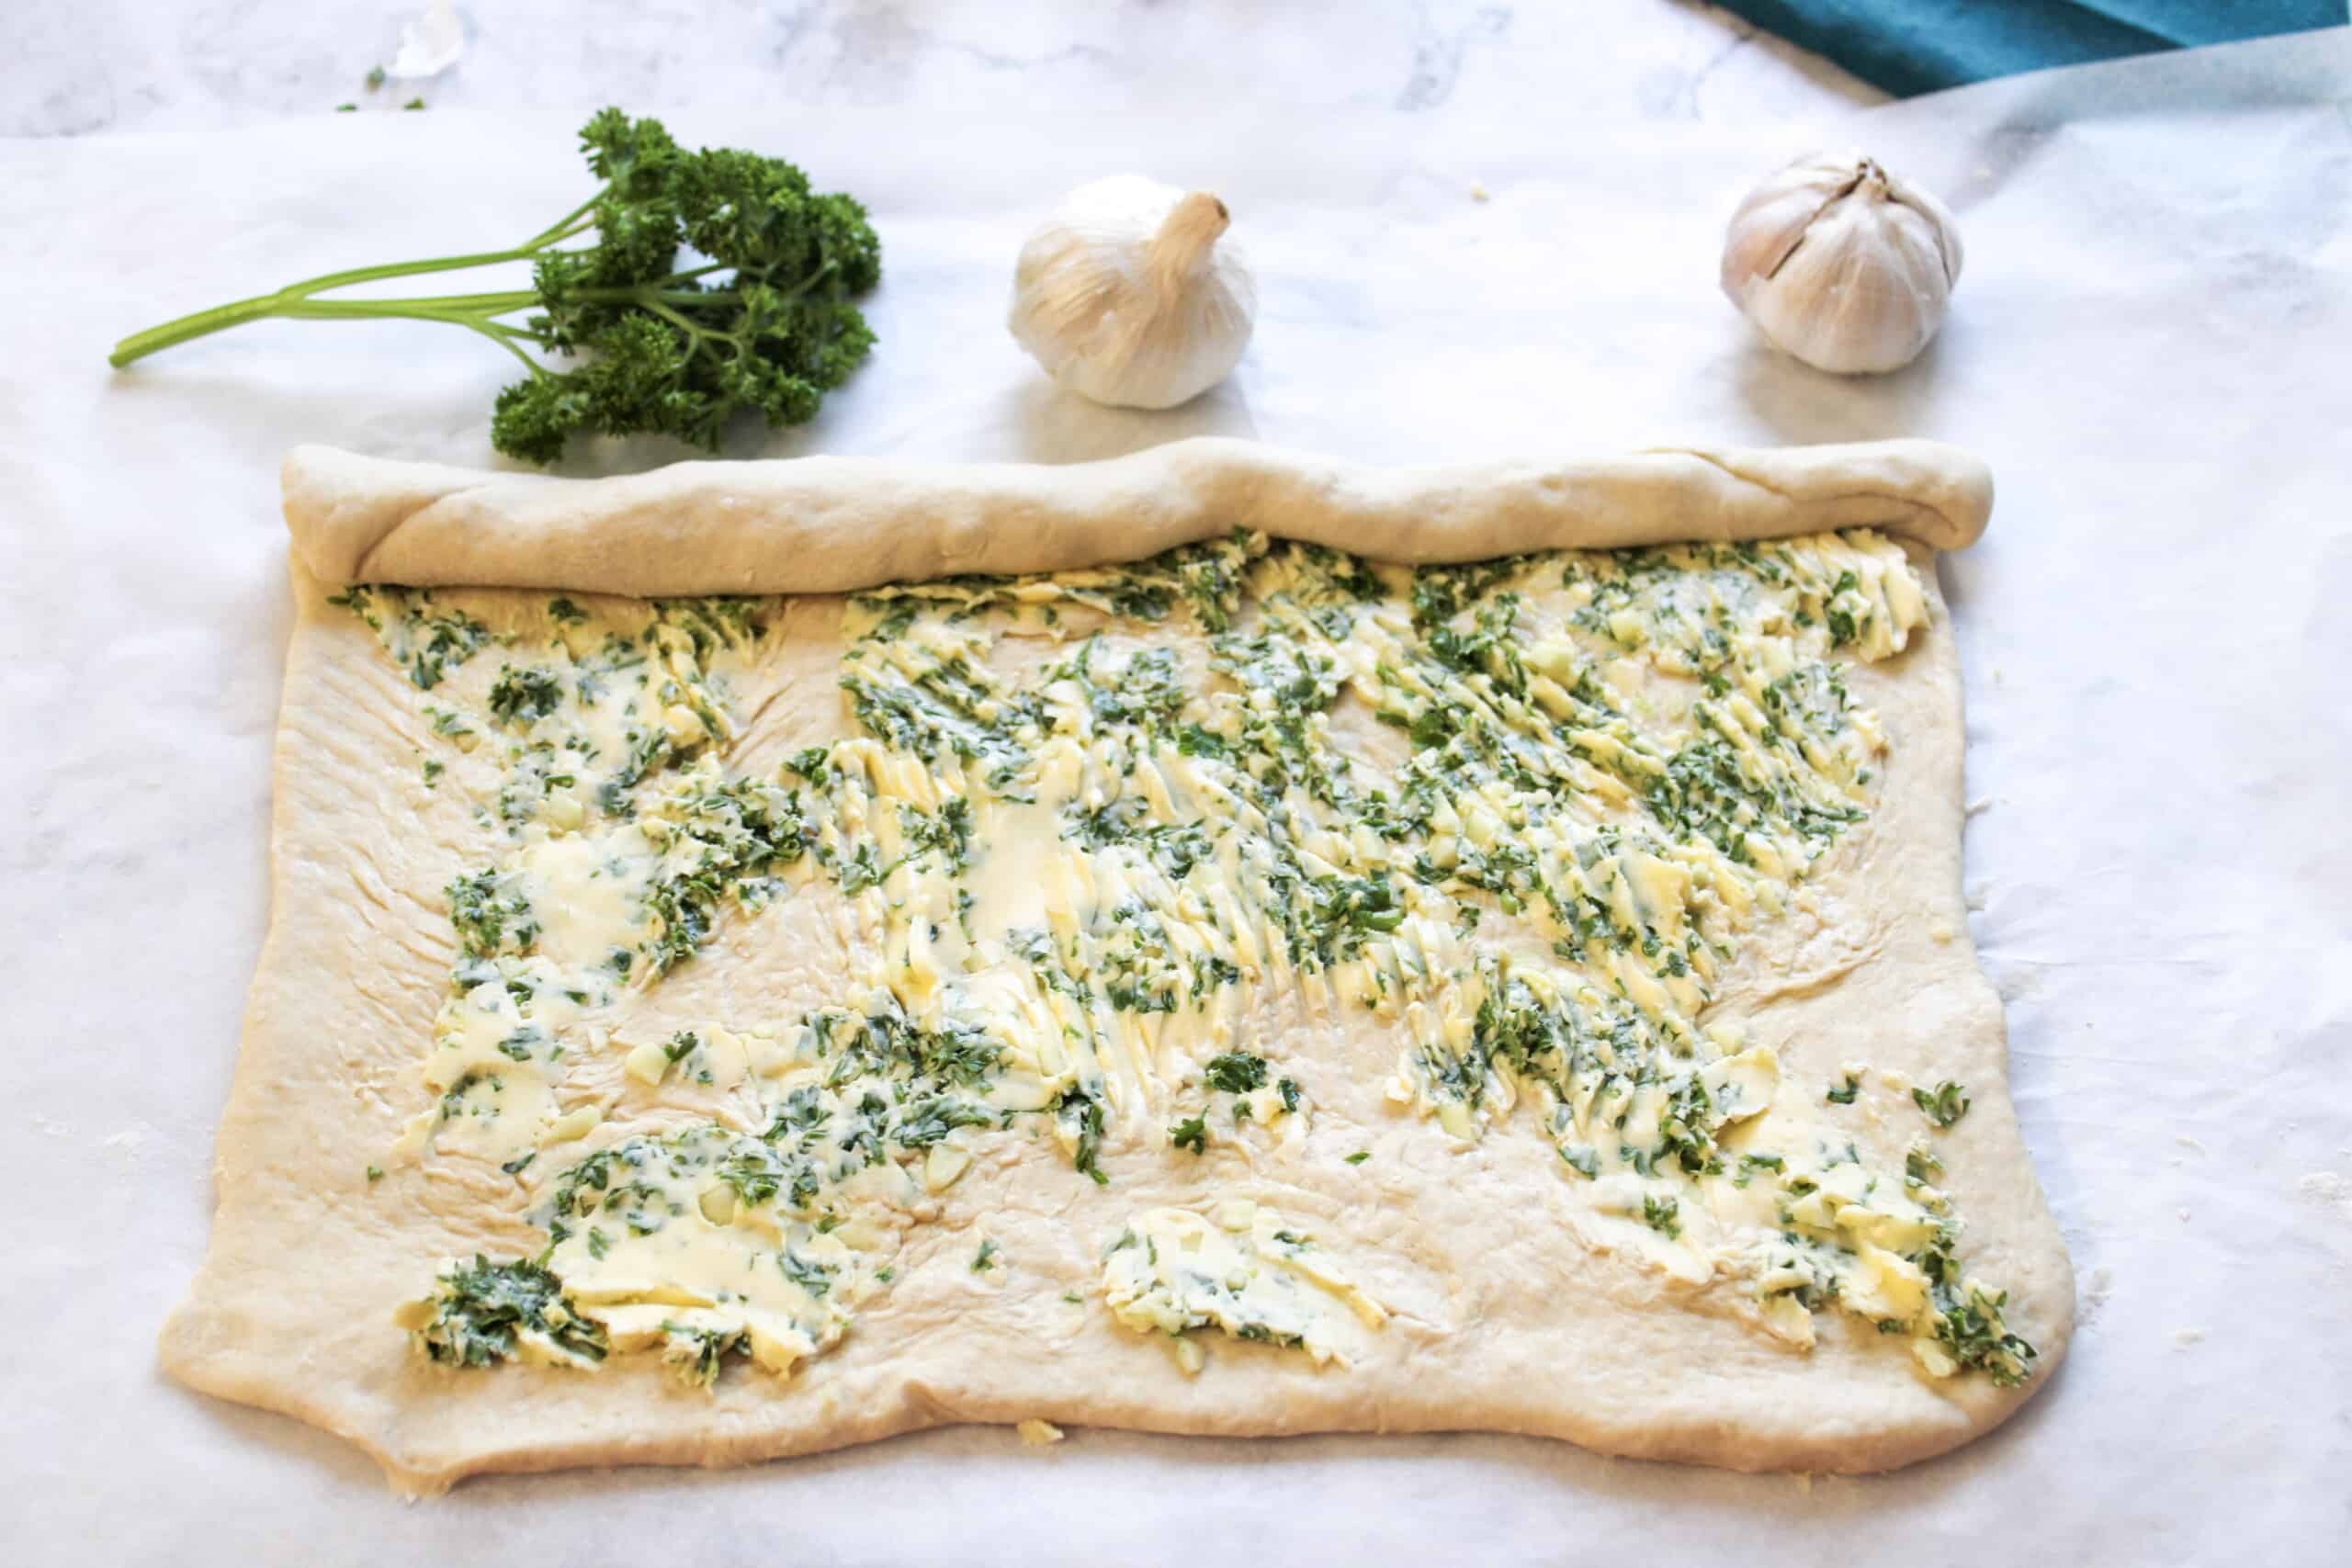 Prepare butter and herb mixture, then brush onto the garlic bread dough